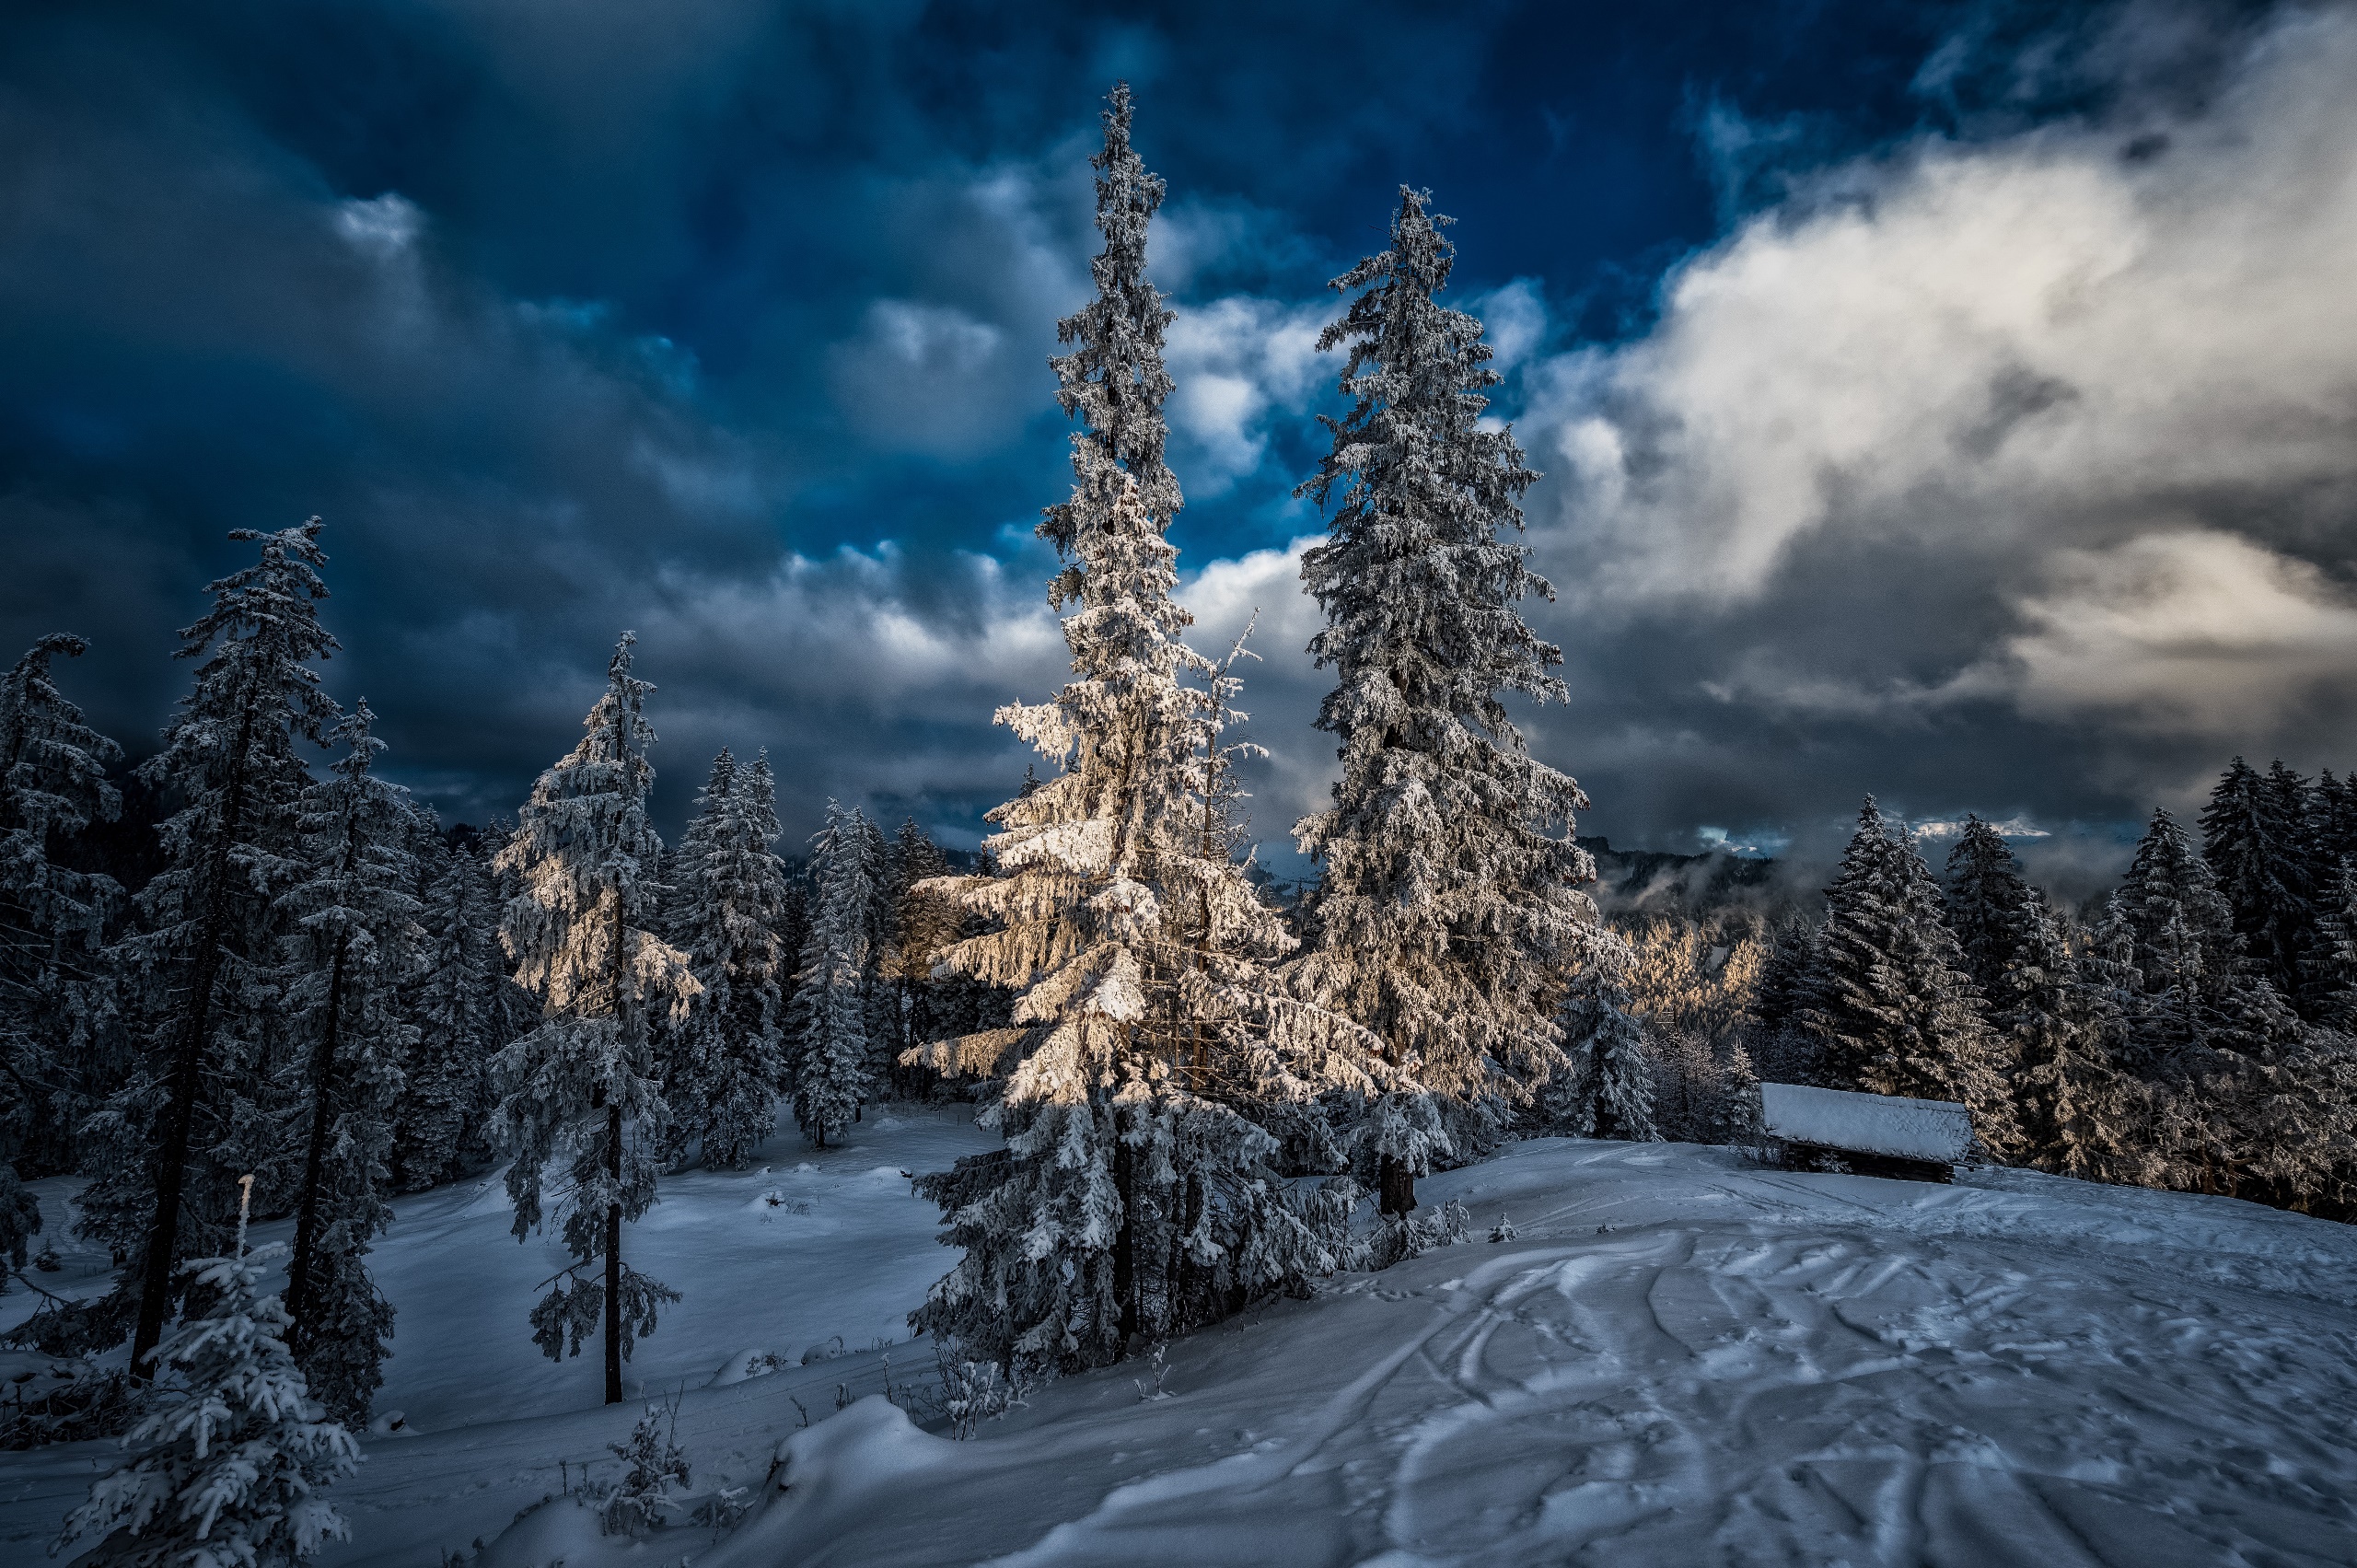 General 2560x1703 winter outdoors snow ice nature trees clouds